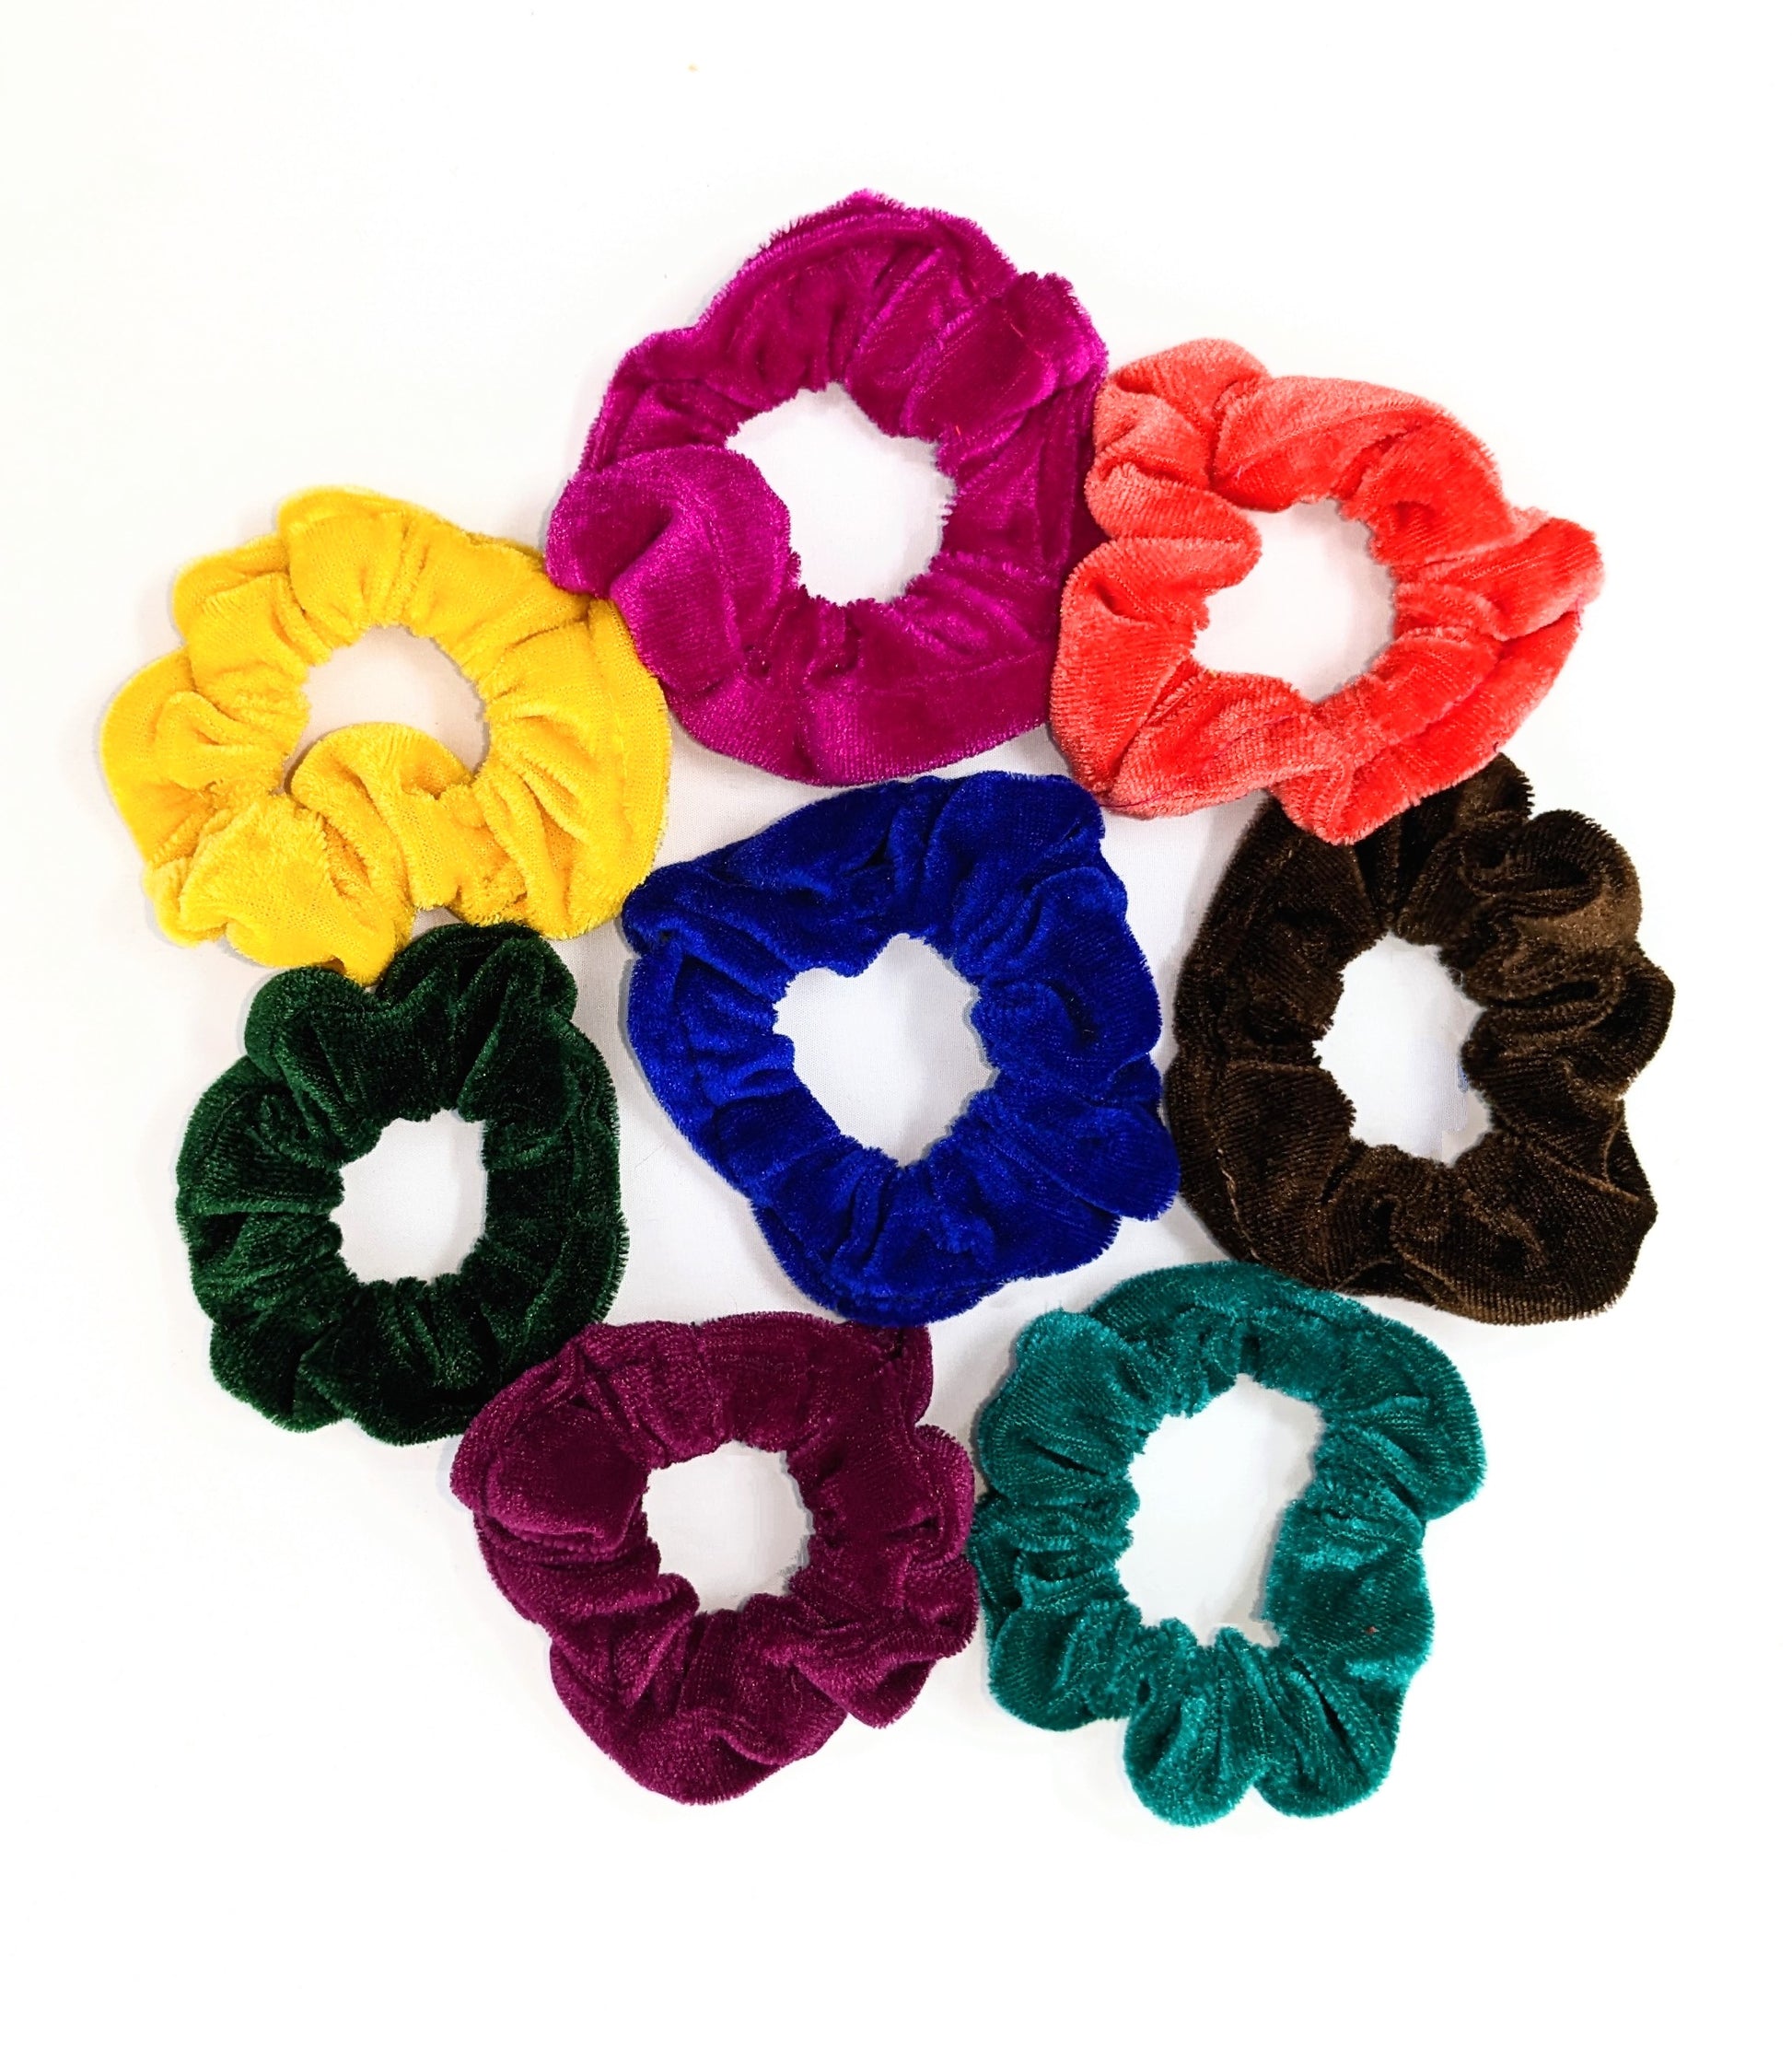 24 Pieces Assorted Satin Hair Bands - Cute and Soft Scrunchies - No crease hair ties - Girls hair accessories - Kool Products